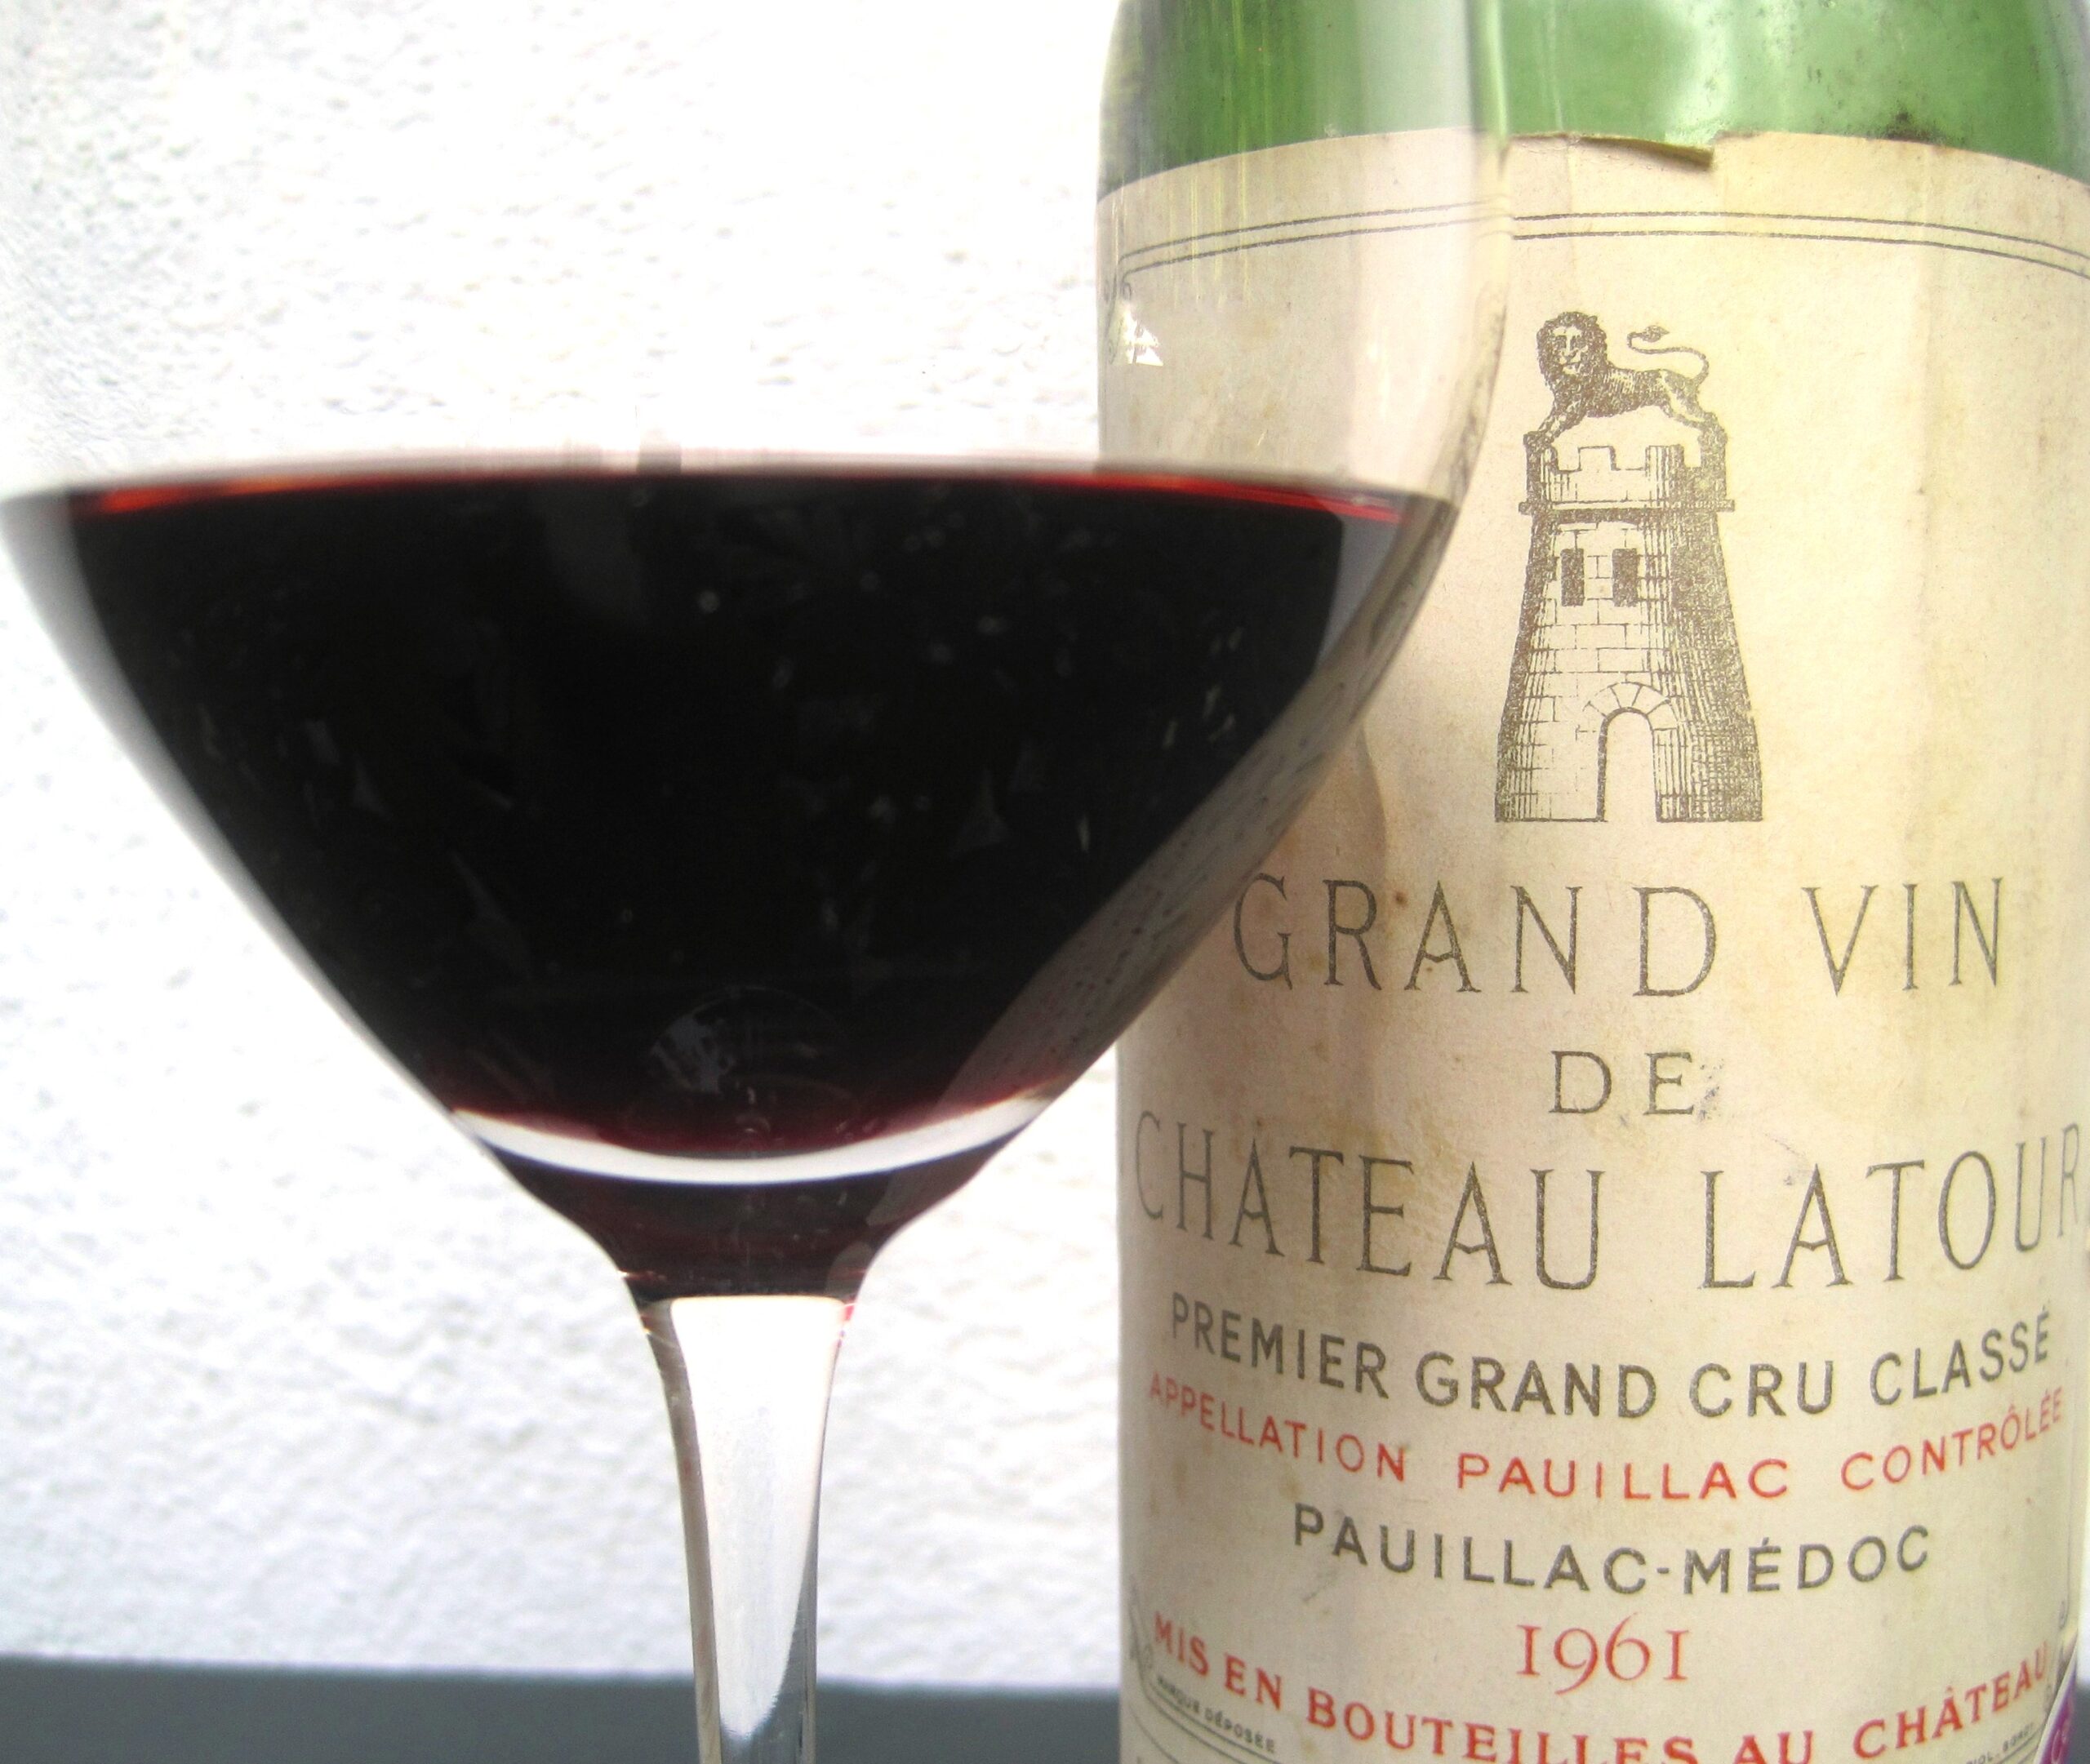 Chateau Latour Record Auction Prices set in Christies Auction